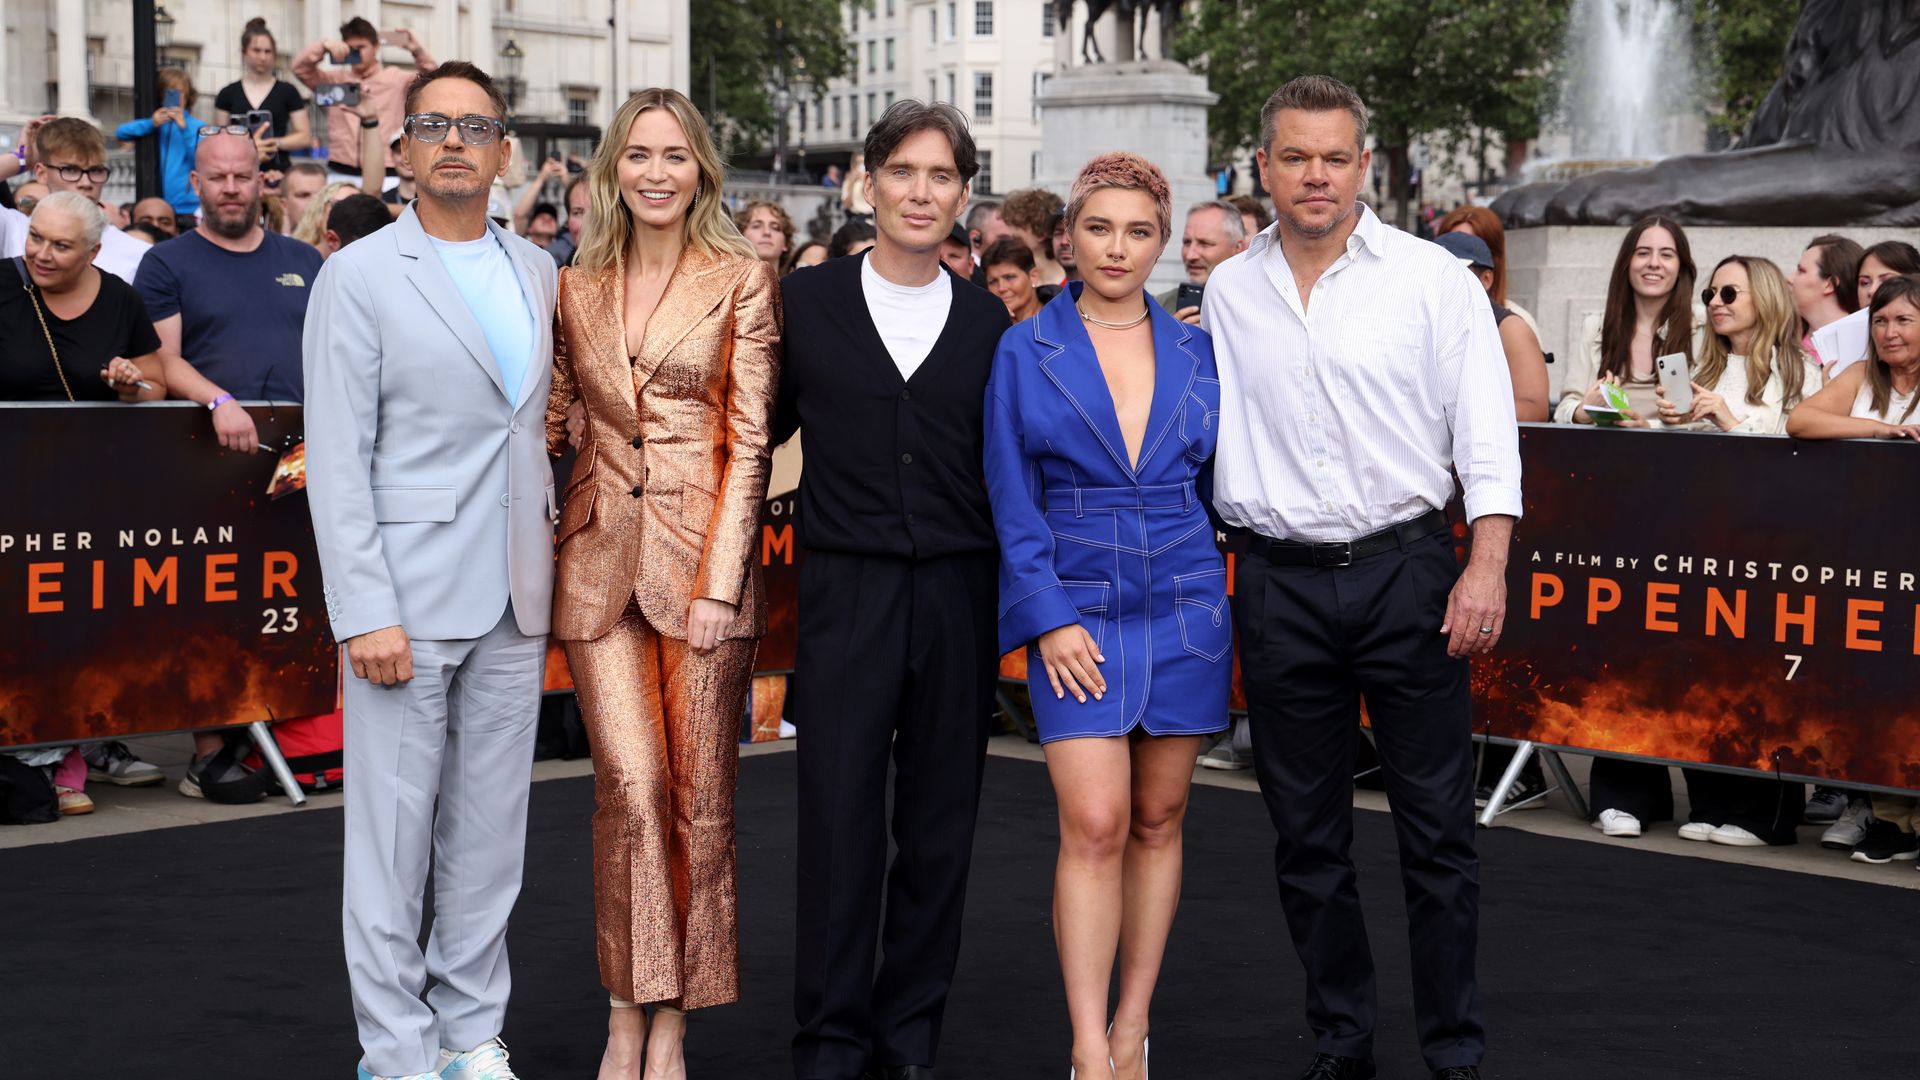 Robert Downey Jr., Christopher Nolan, Emily Blunt, Cillian Murphy, Florence Pugh and Matt Damon attend the London Photocall for Universal Pictures' "Oppenheimer" at Trafalgar Square on July 12, 2023 in London, England